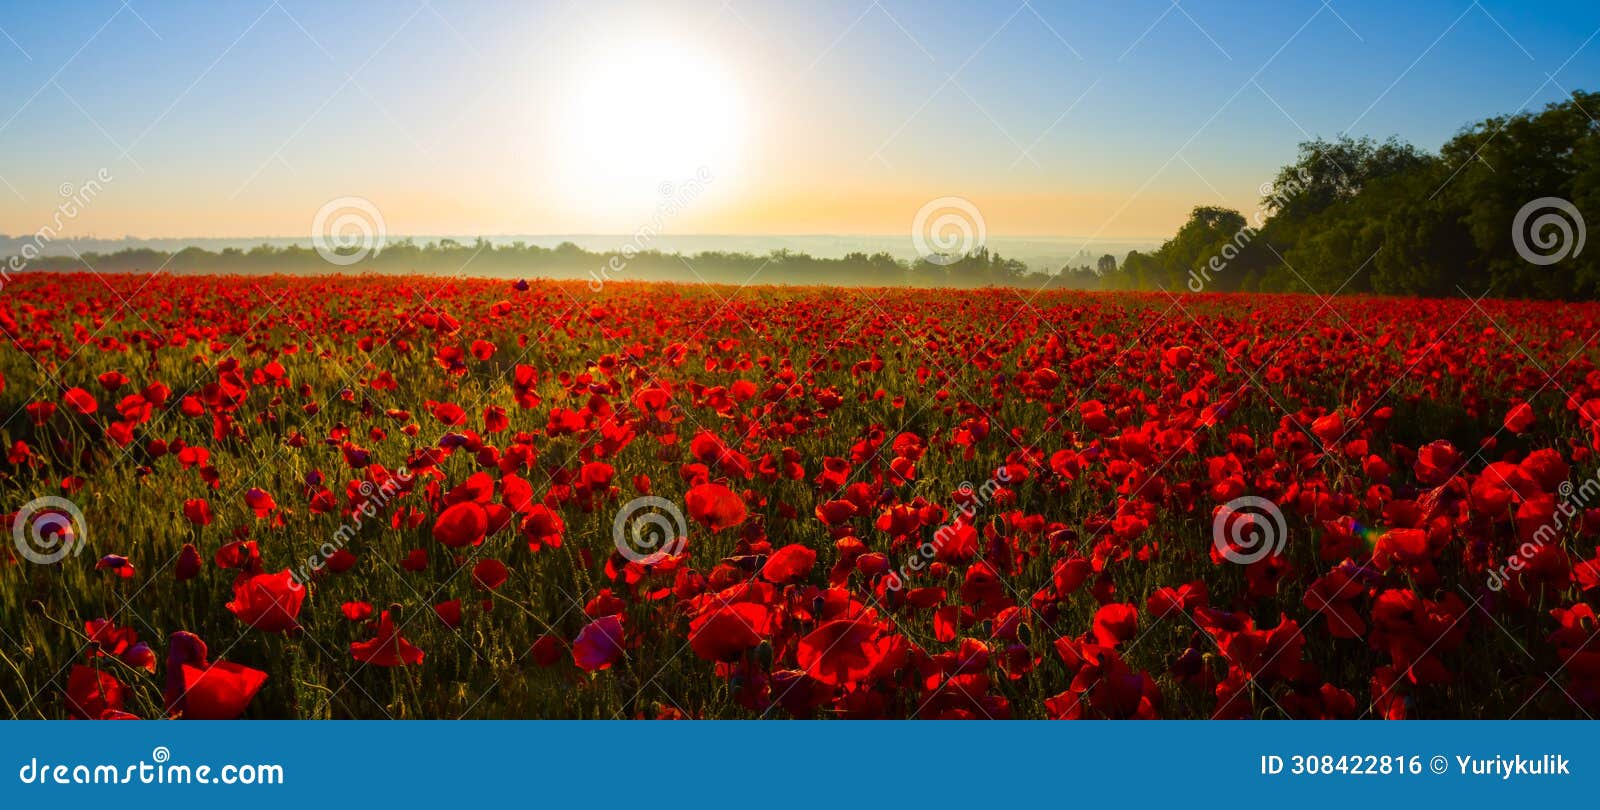 prairie covered by red poppy flowers at the sunrise